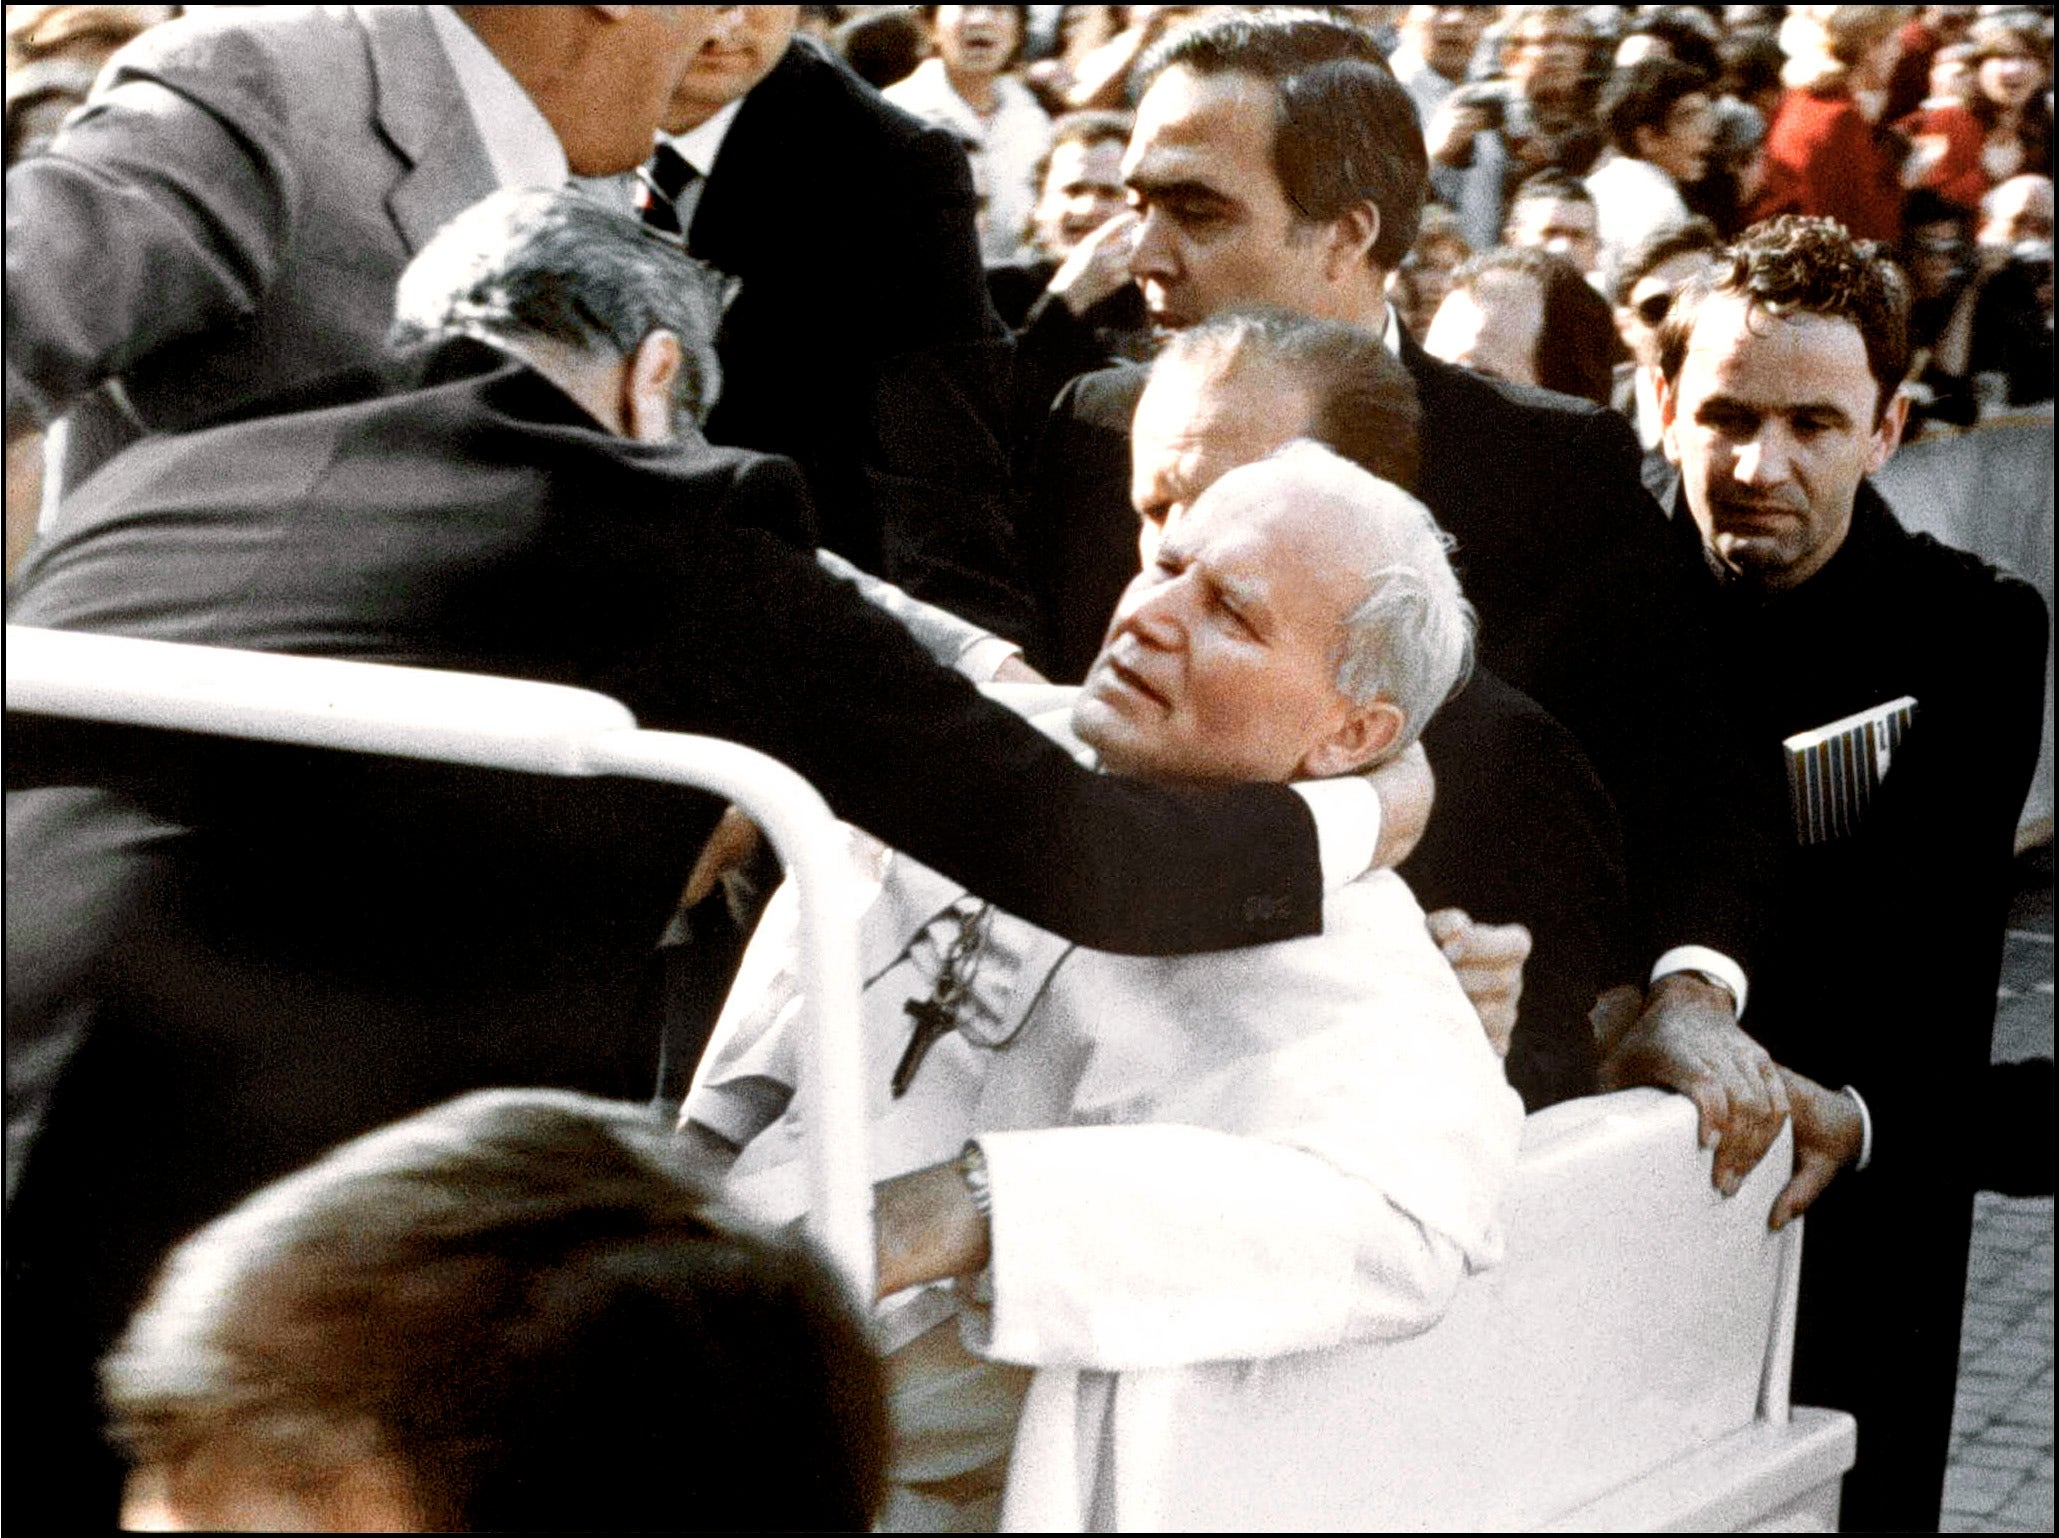 On this day in history, May 13, 1981, Pope John Paul II survives assassination attempt